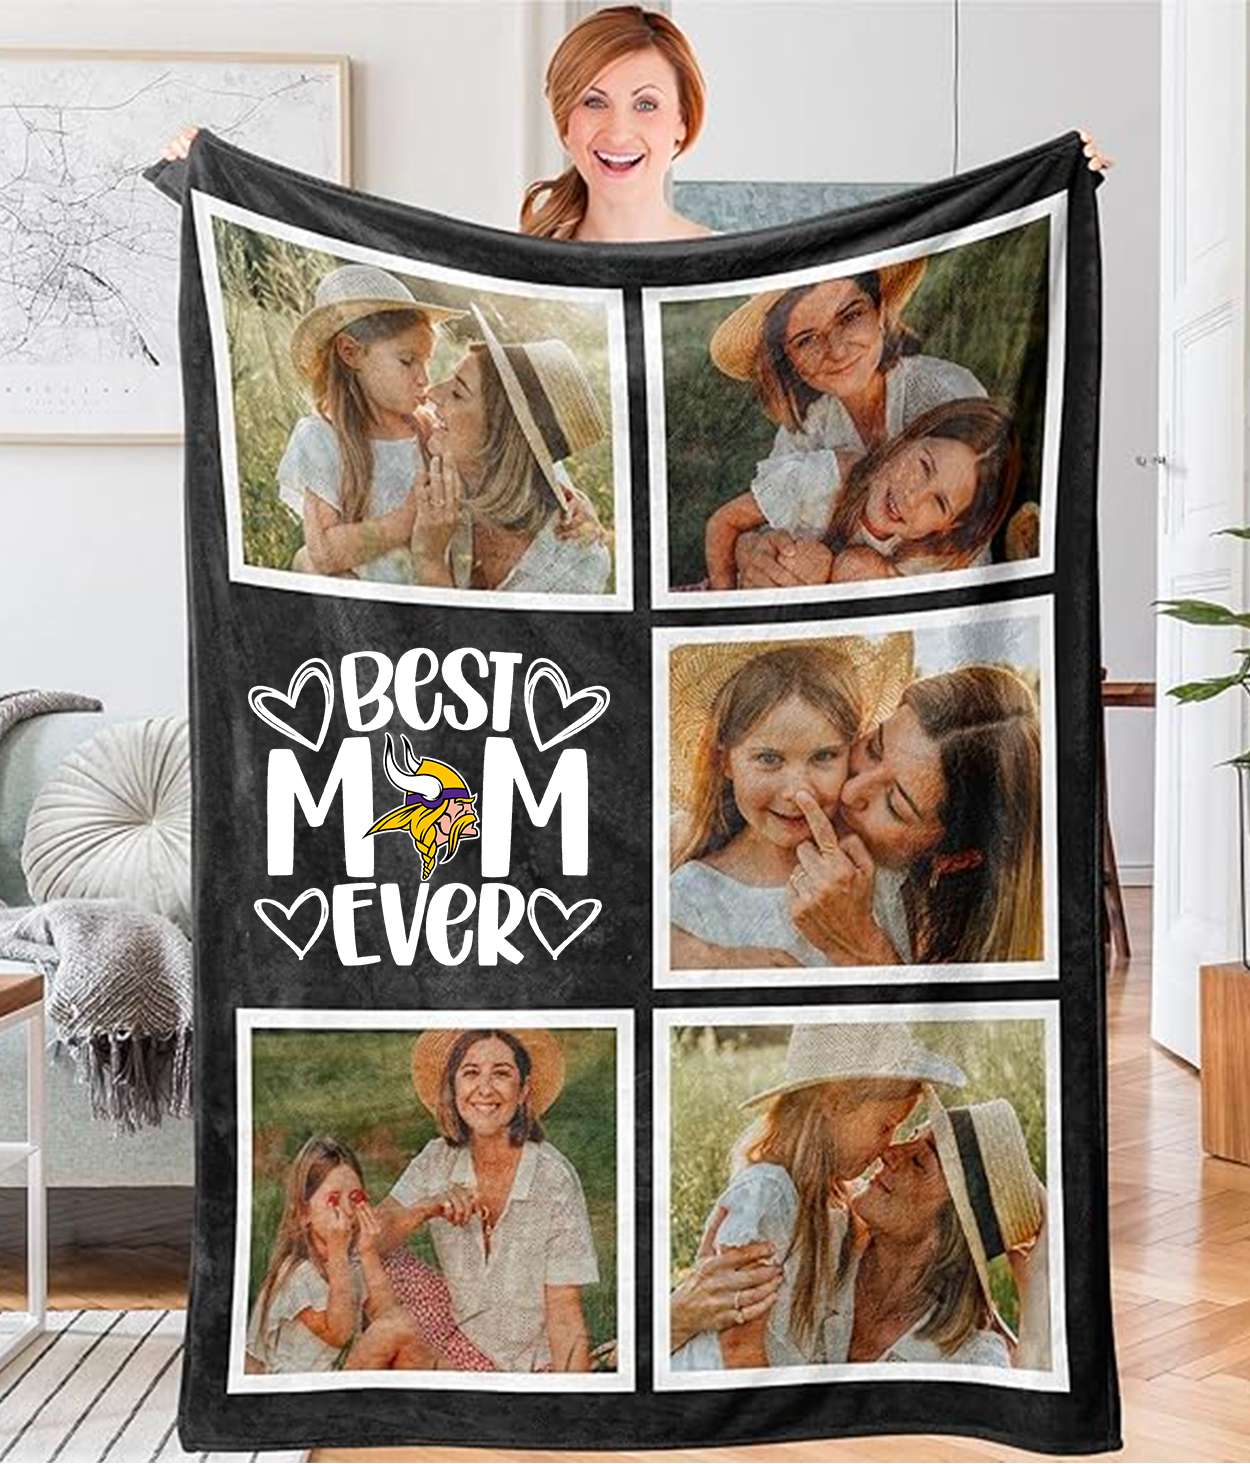 Best Mom Ever - Custom NFL Minnesota Vikings Blankets with Pictures for Mother's Day Gift